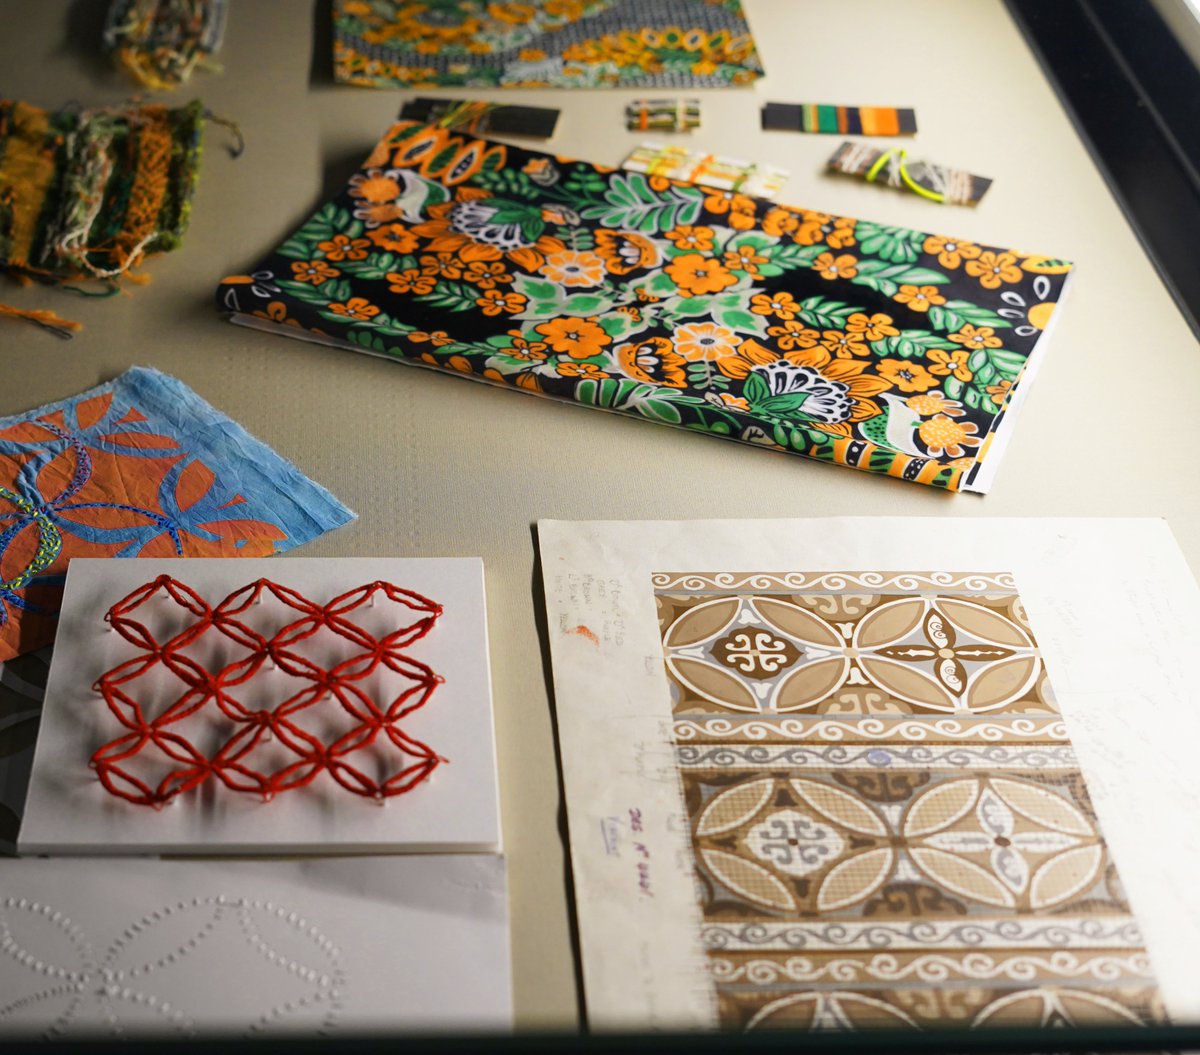 Last chance to see!!

Our exhibition 'Patterns of Play: The Gleneden Post-War Design Archive' closes on Friday 24 May.

Curated by @HuddersfieldUni's Dr Matthew Taylor, it explores vintage textile design through contemporary artistic responses.